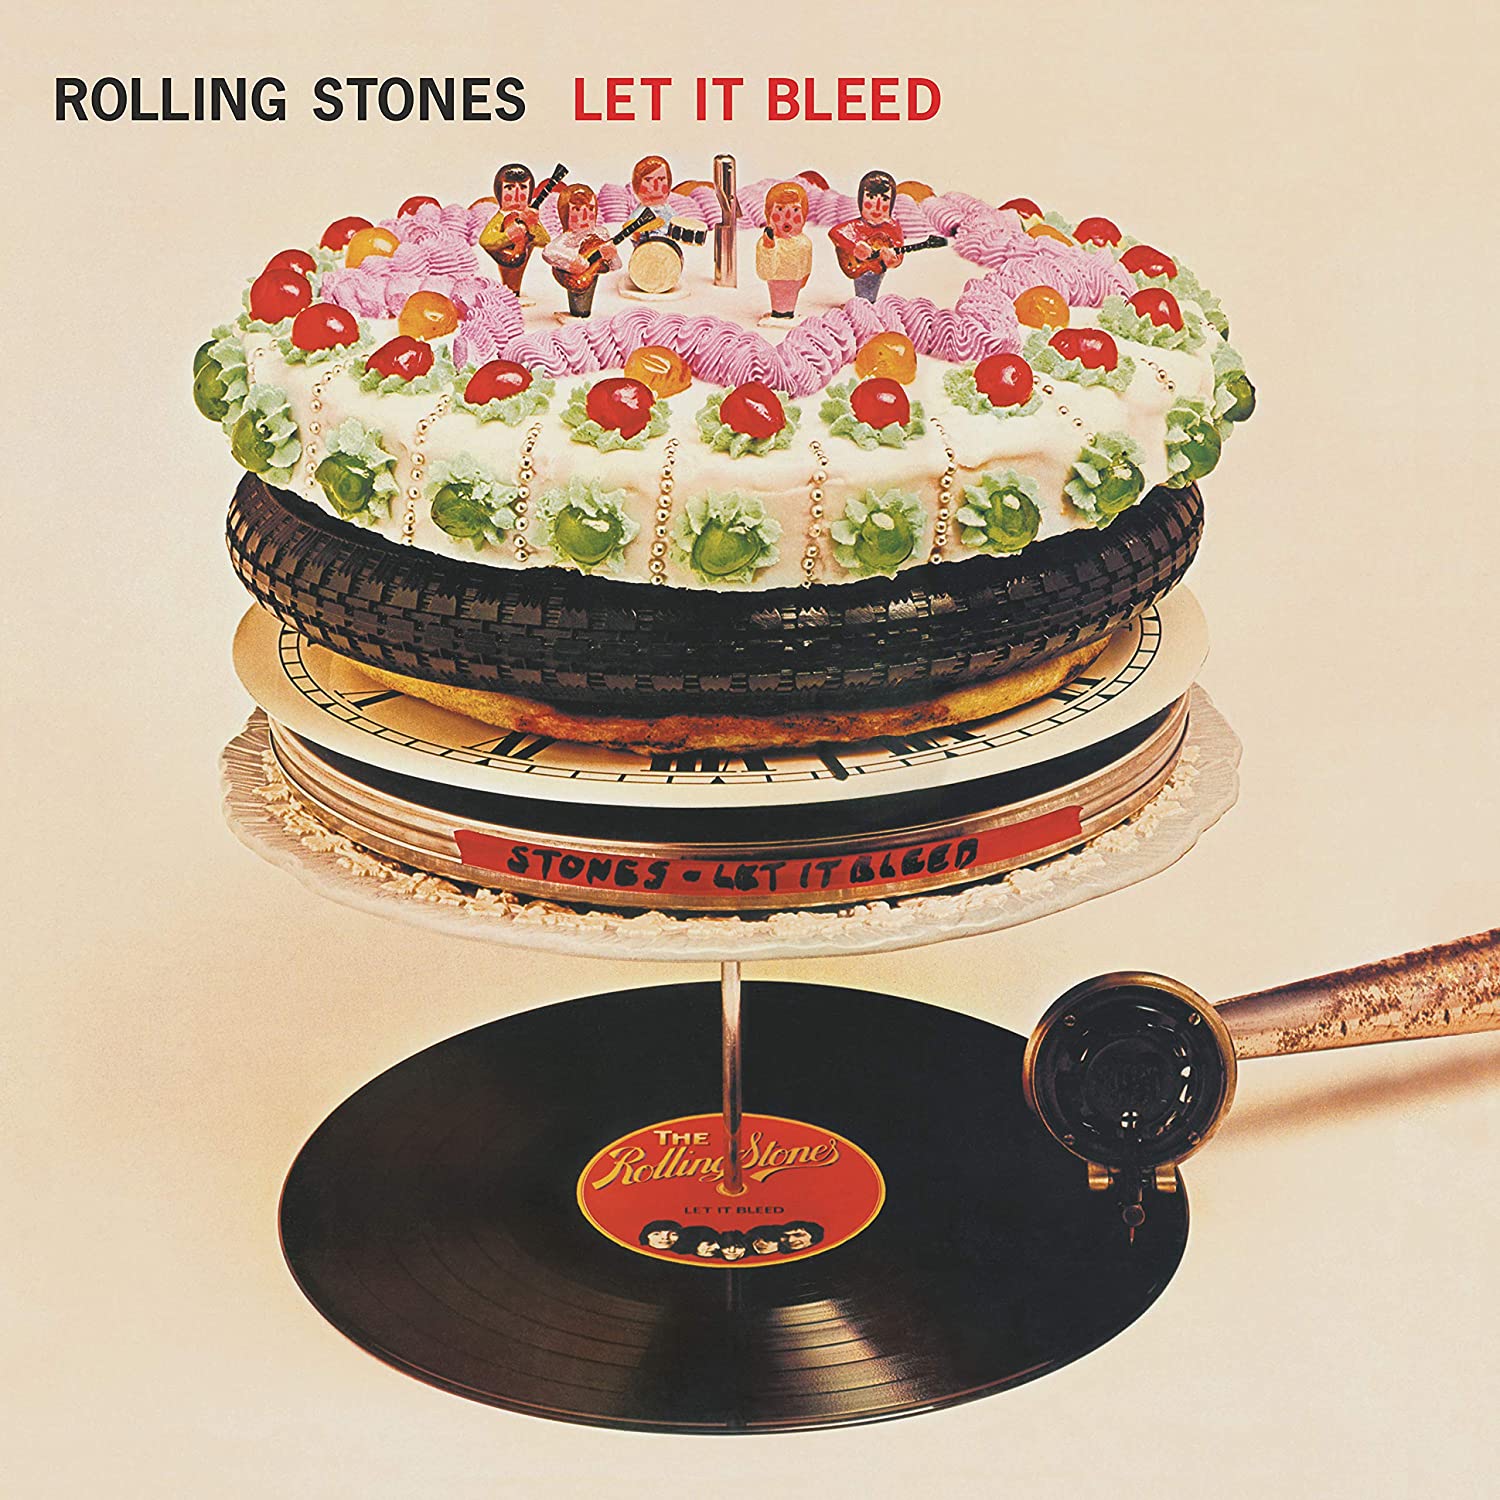 Let It Bleed – The Rolling Stones (1969)